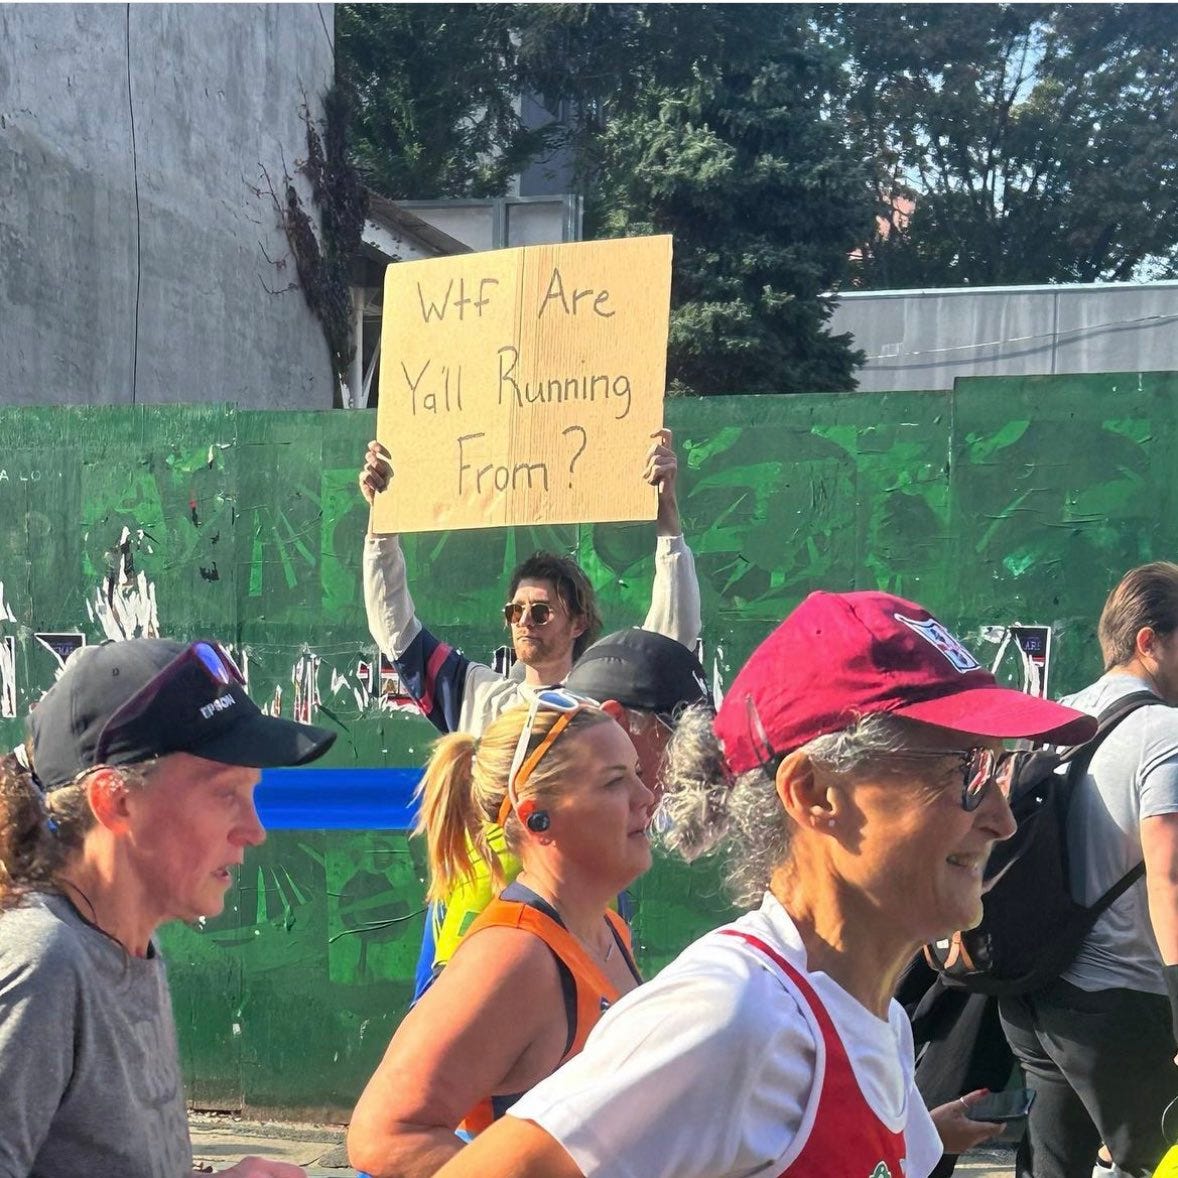 Man holding sign beside marathon runners that reads "WTF Y'all running from?"